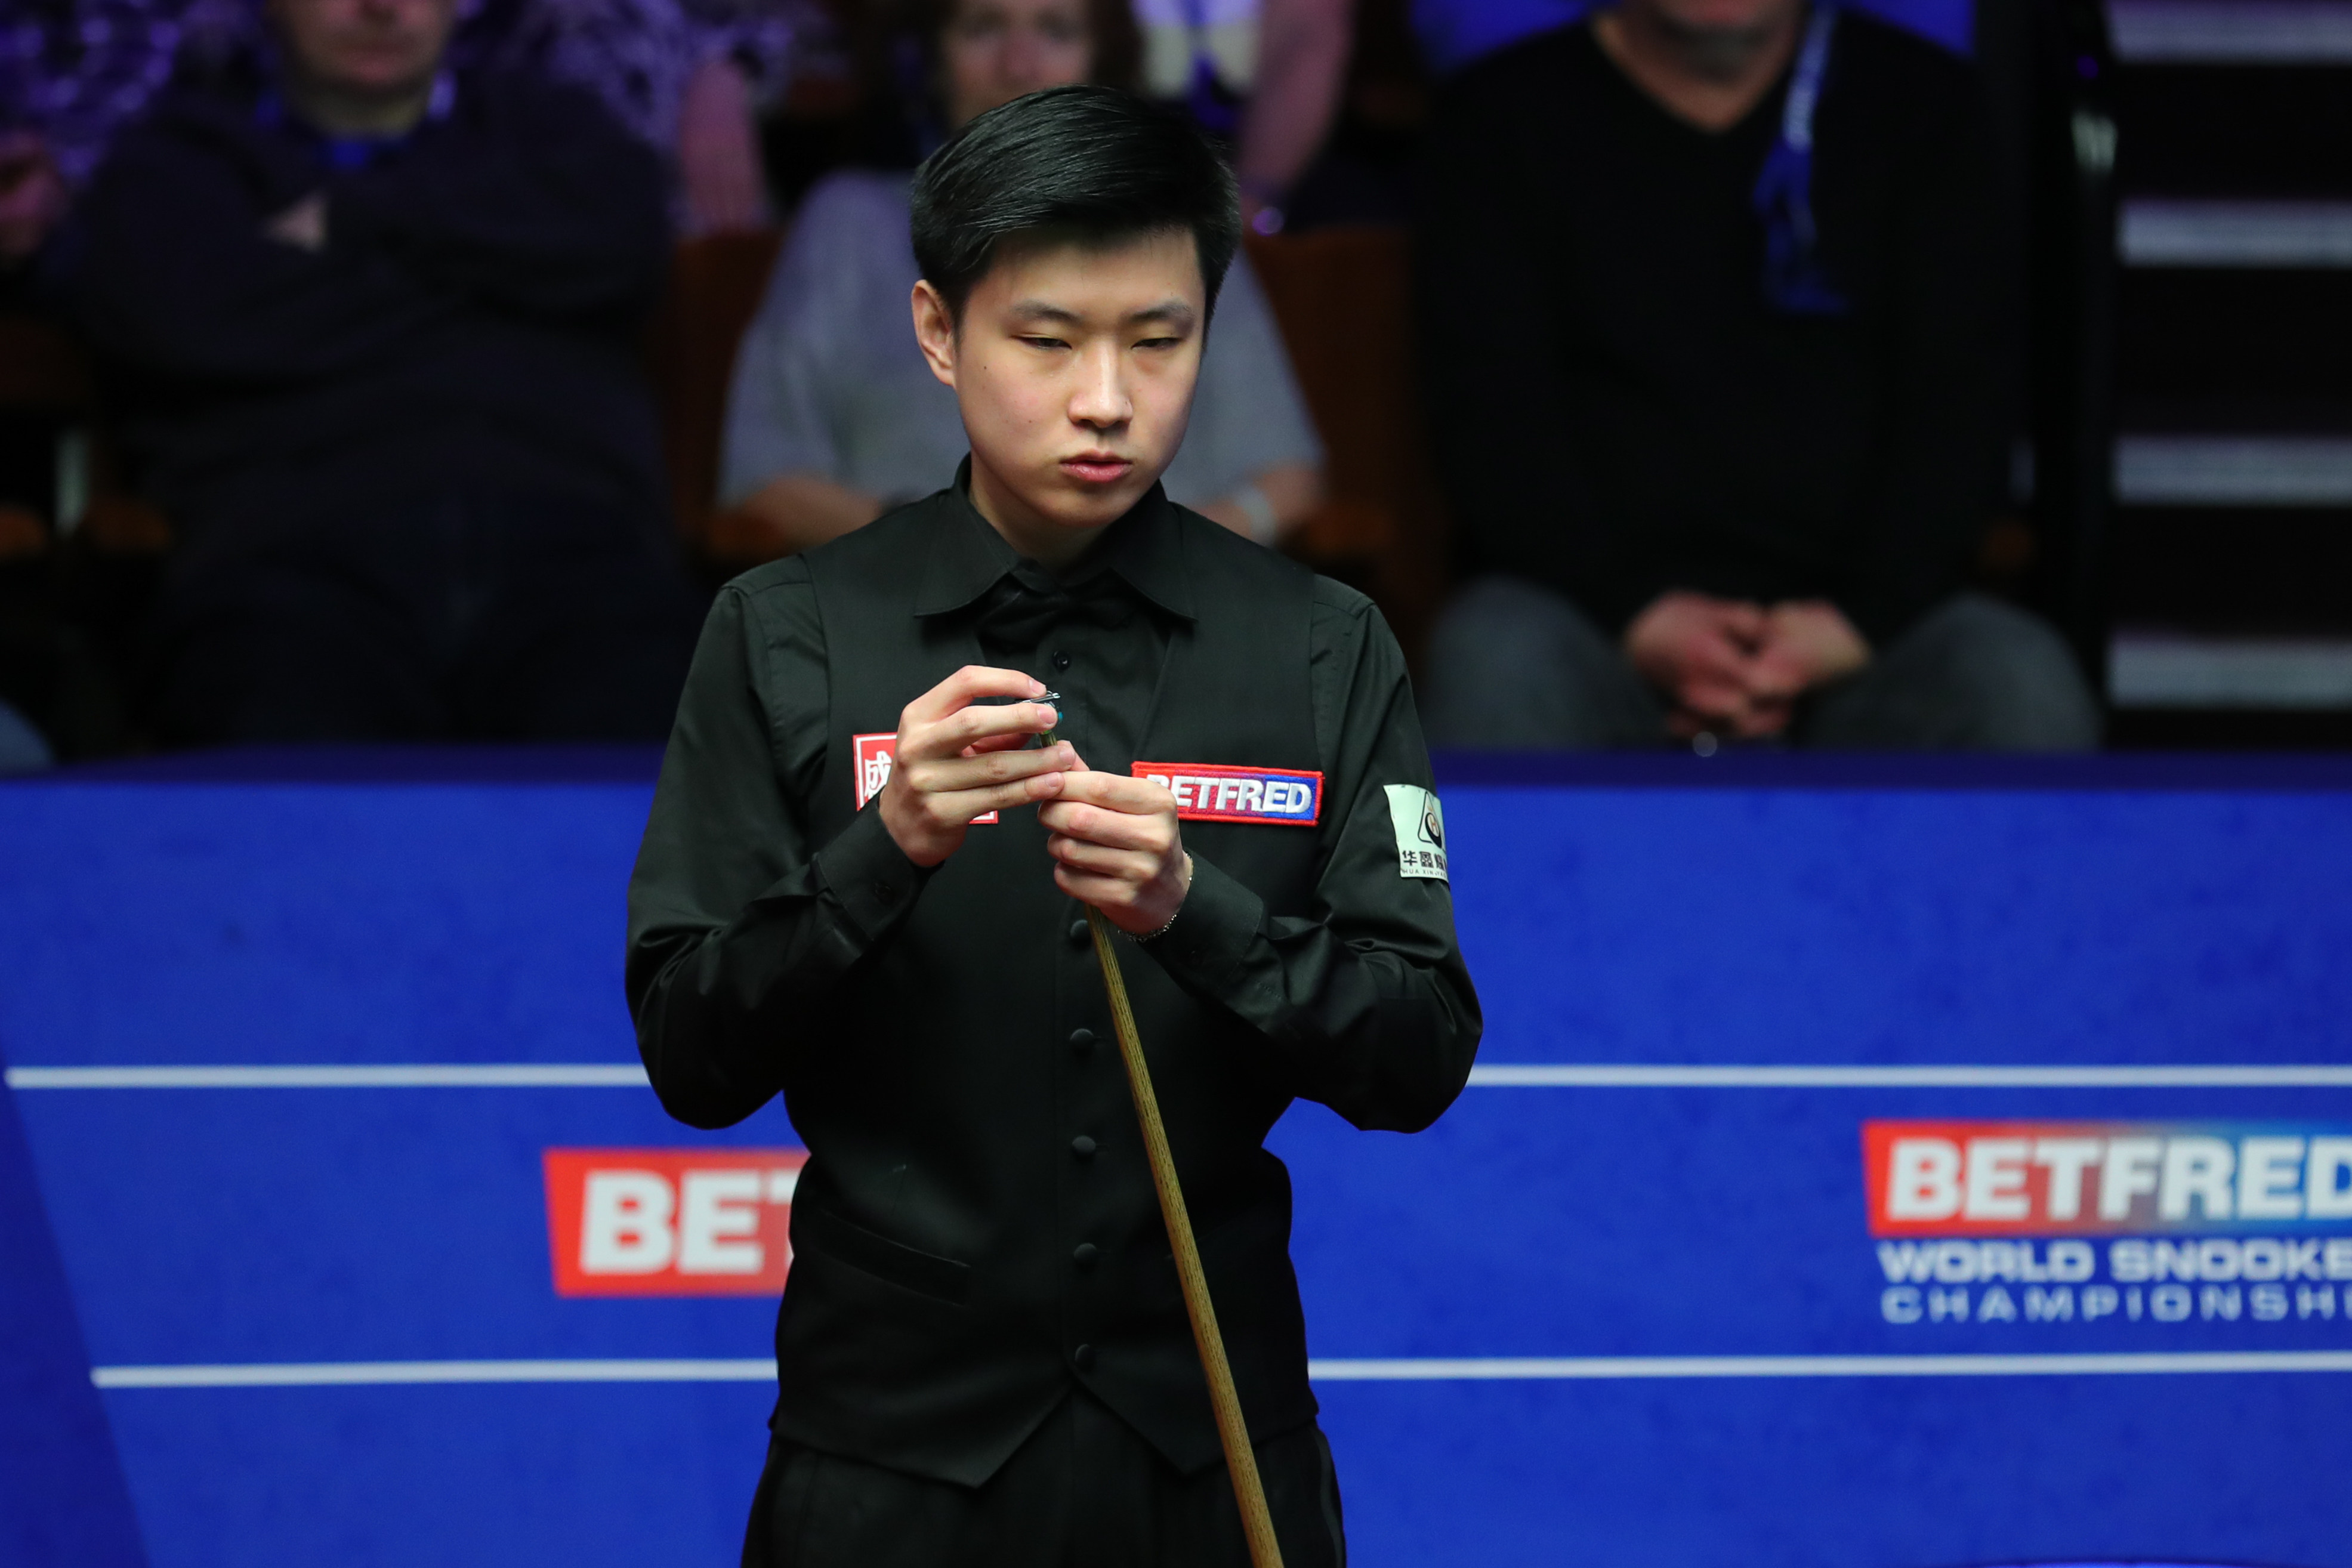 Snooker match-fixing scandal 10 Chinese players including Zhao Xintong and Yan Bingtao to miss Crucible showpiece South China Morning Post